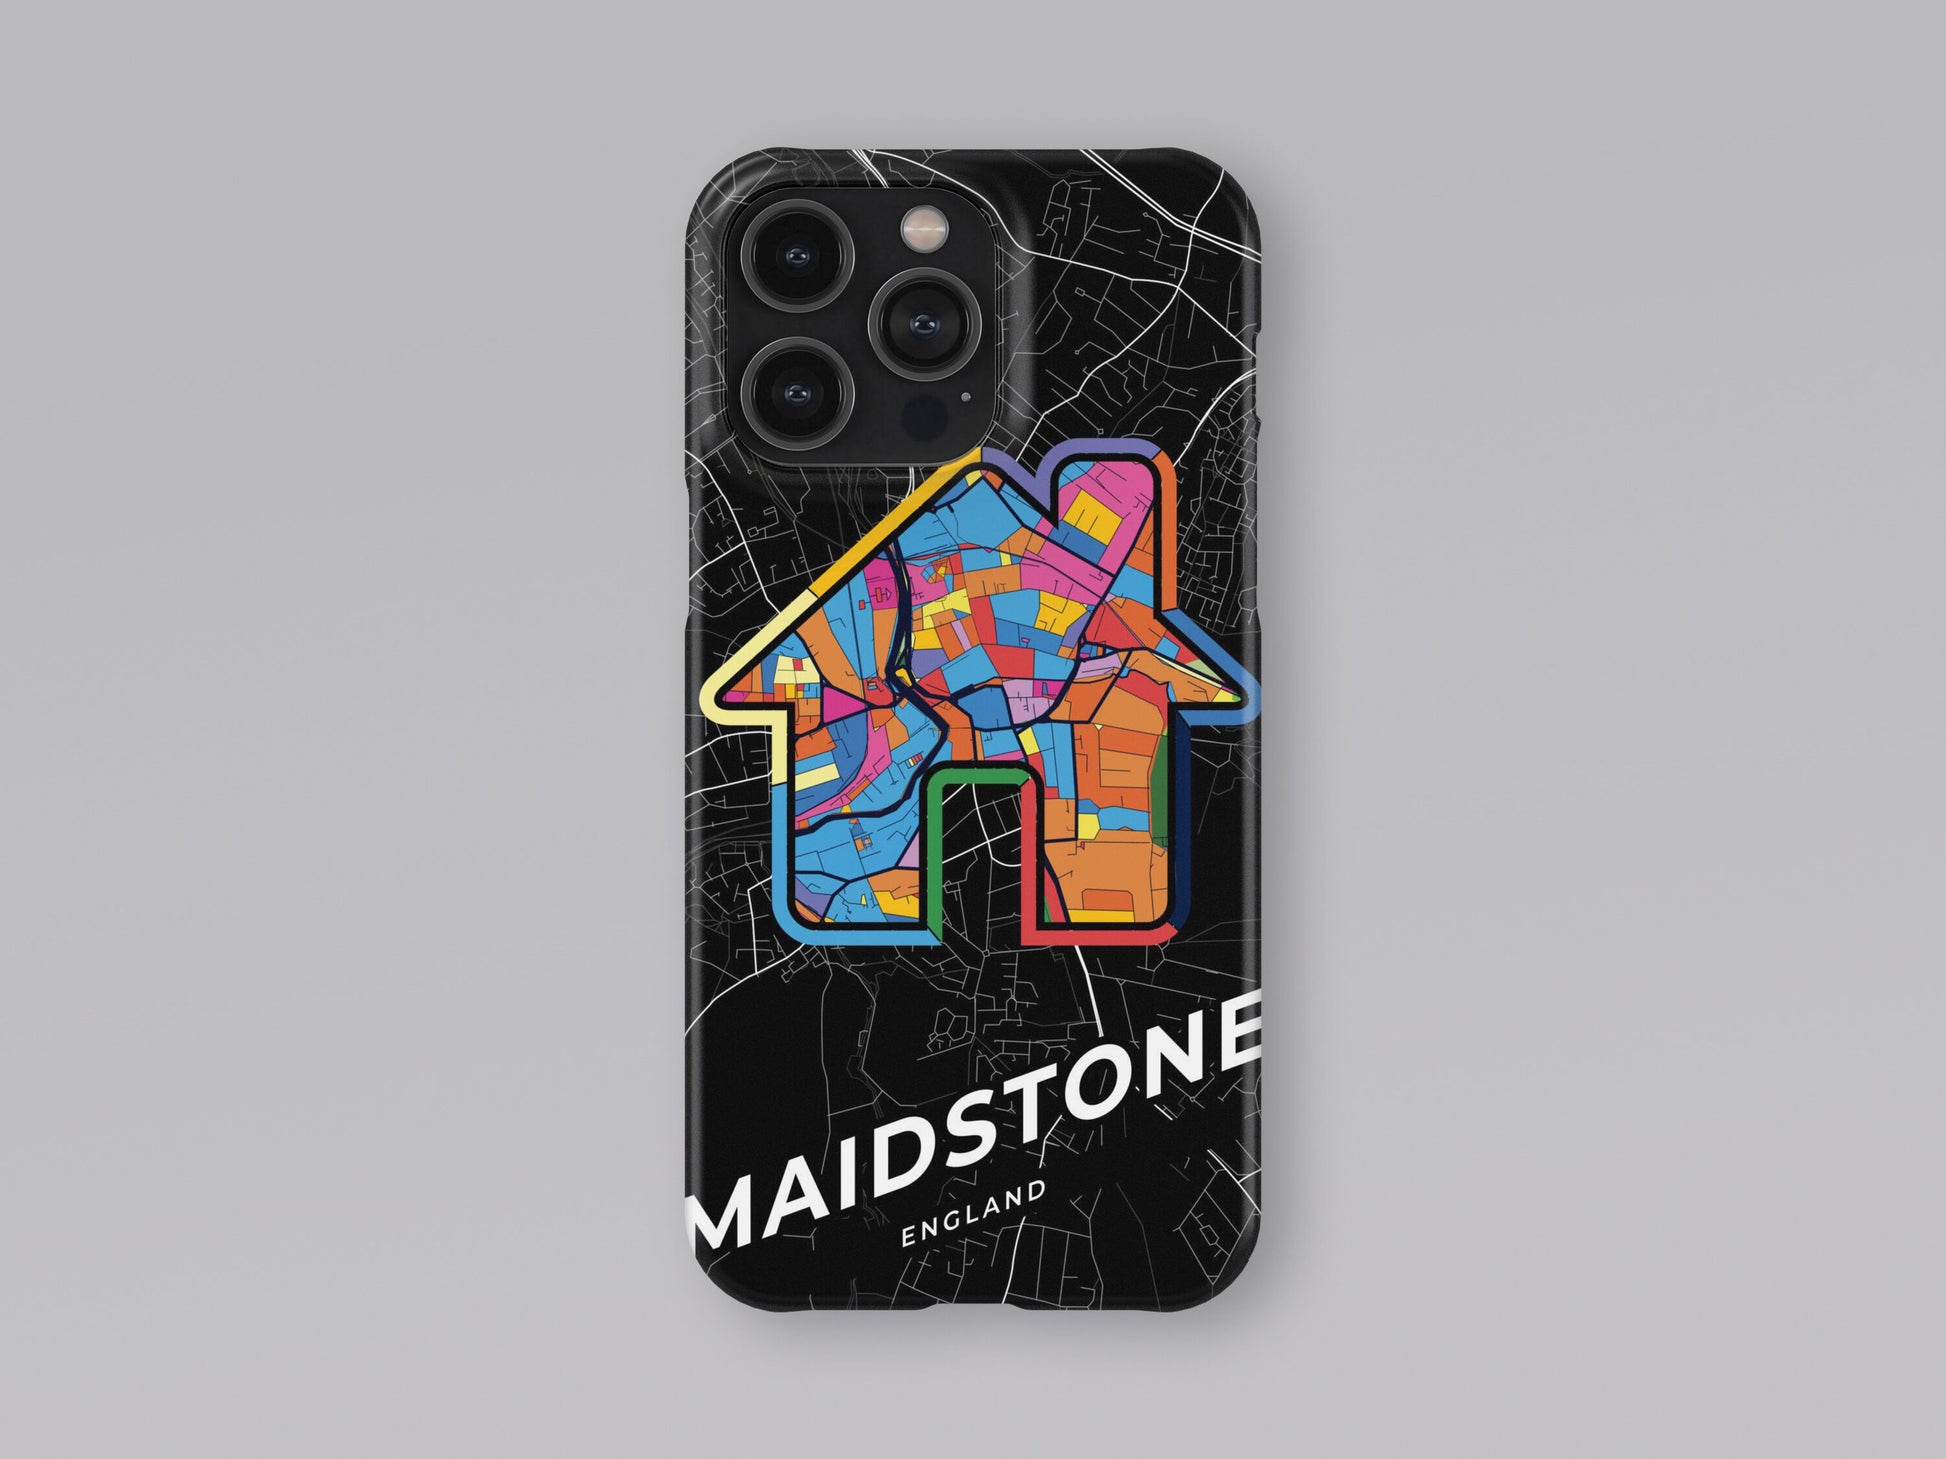 Maidstone England slim phone case with colorful icon. Birthday, wedding or housewarming gift. Couple match cases. 3